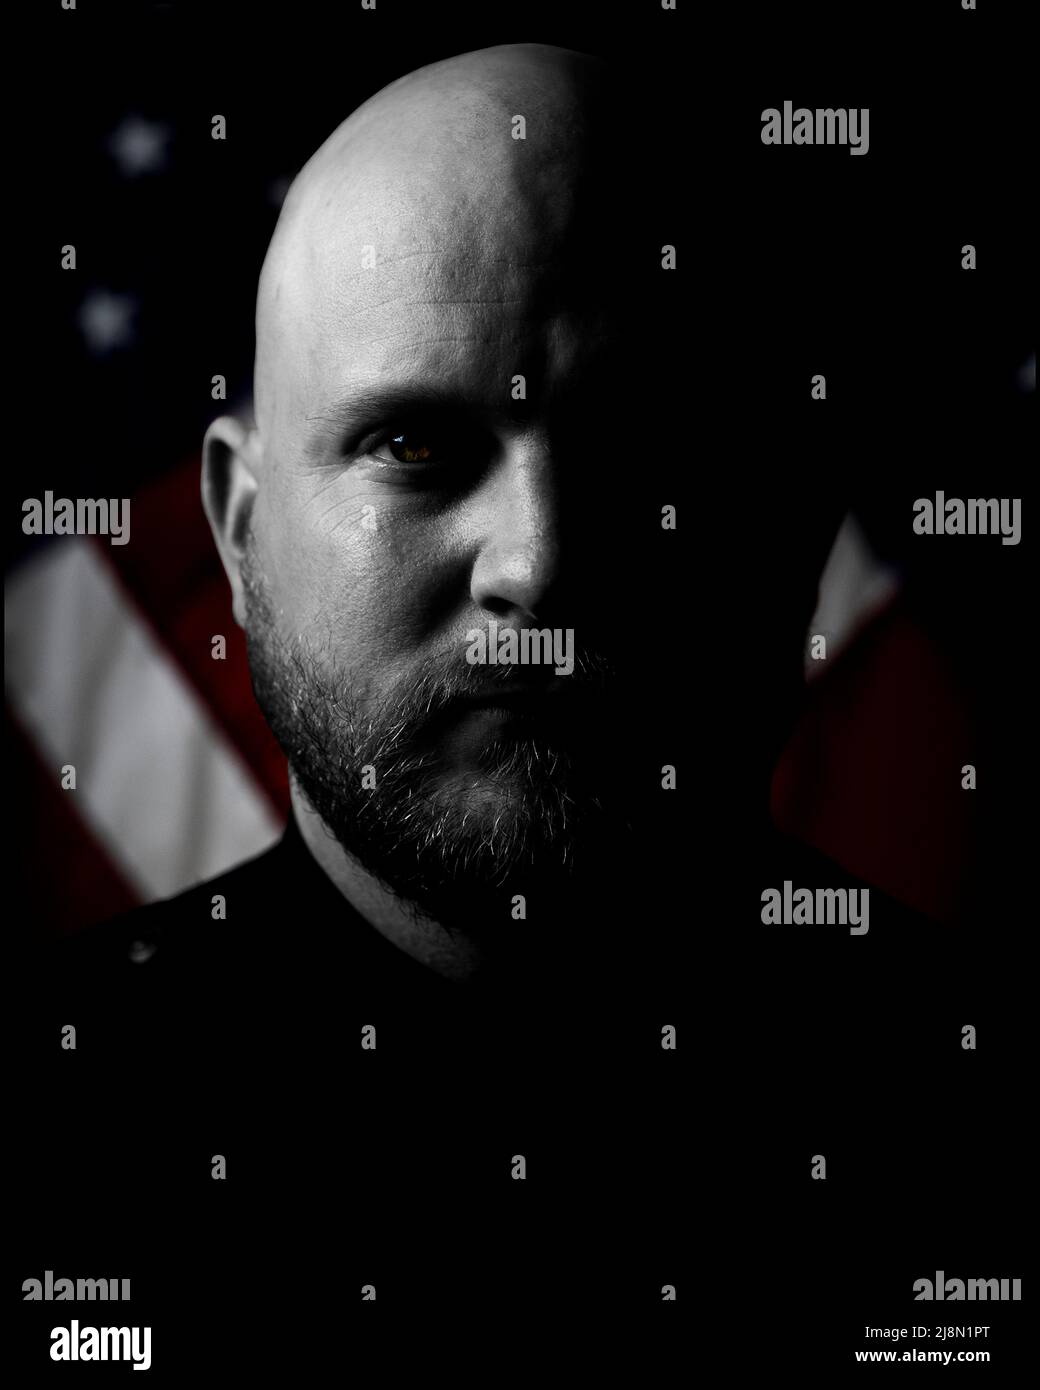 Black and white half shadow portrait with colored flags in the background Stock Photo